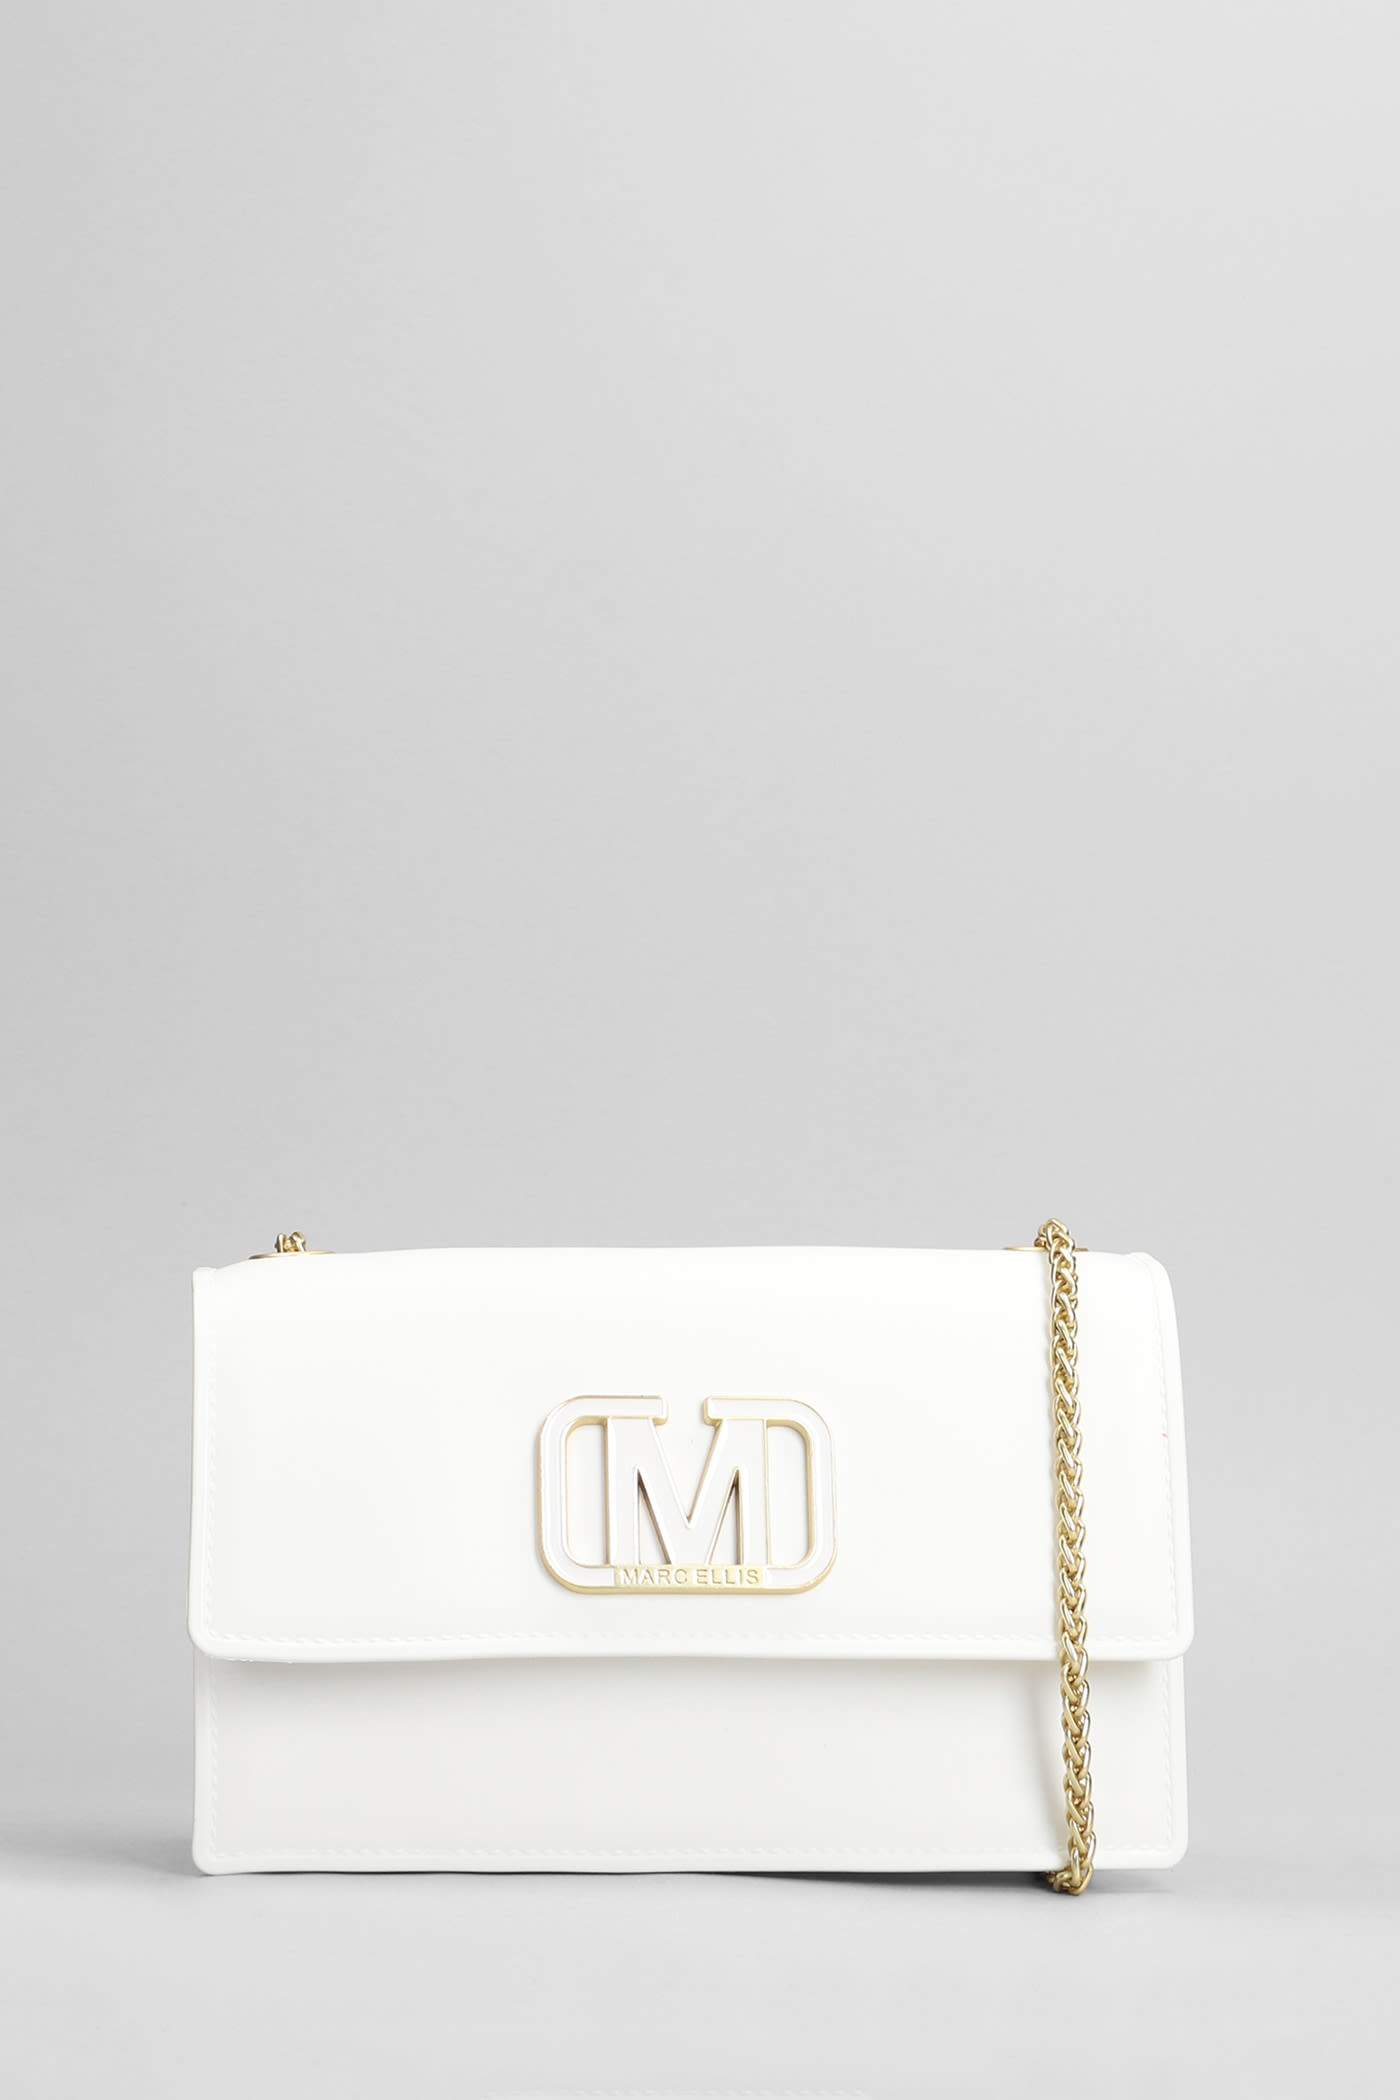 Marc Ellis Flat Supermee M Hand Bag In White Faux Leather